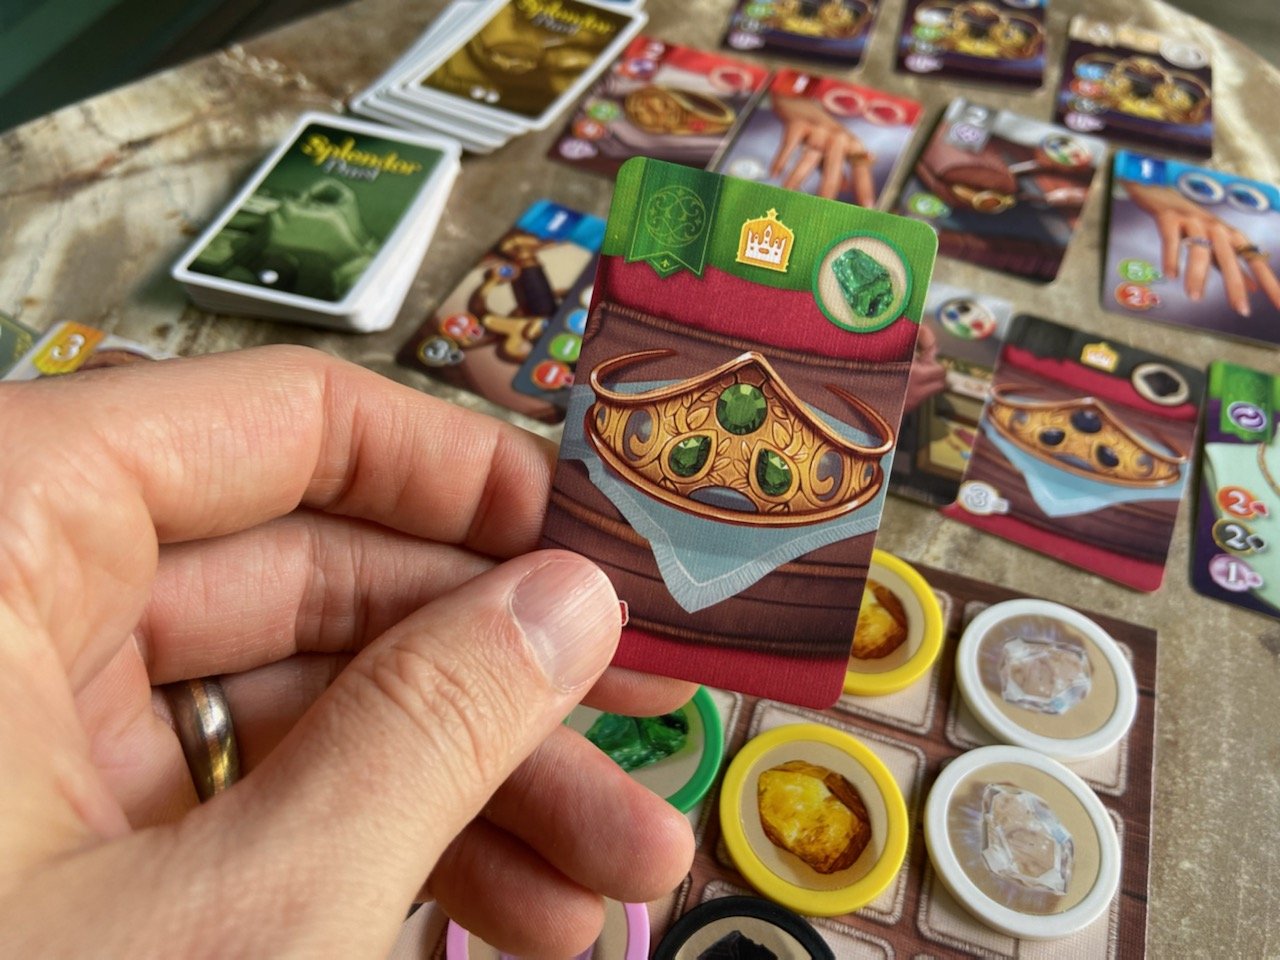 Splendor Duel Might Be Our Favorite 2-Player Game